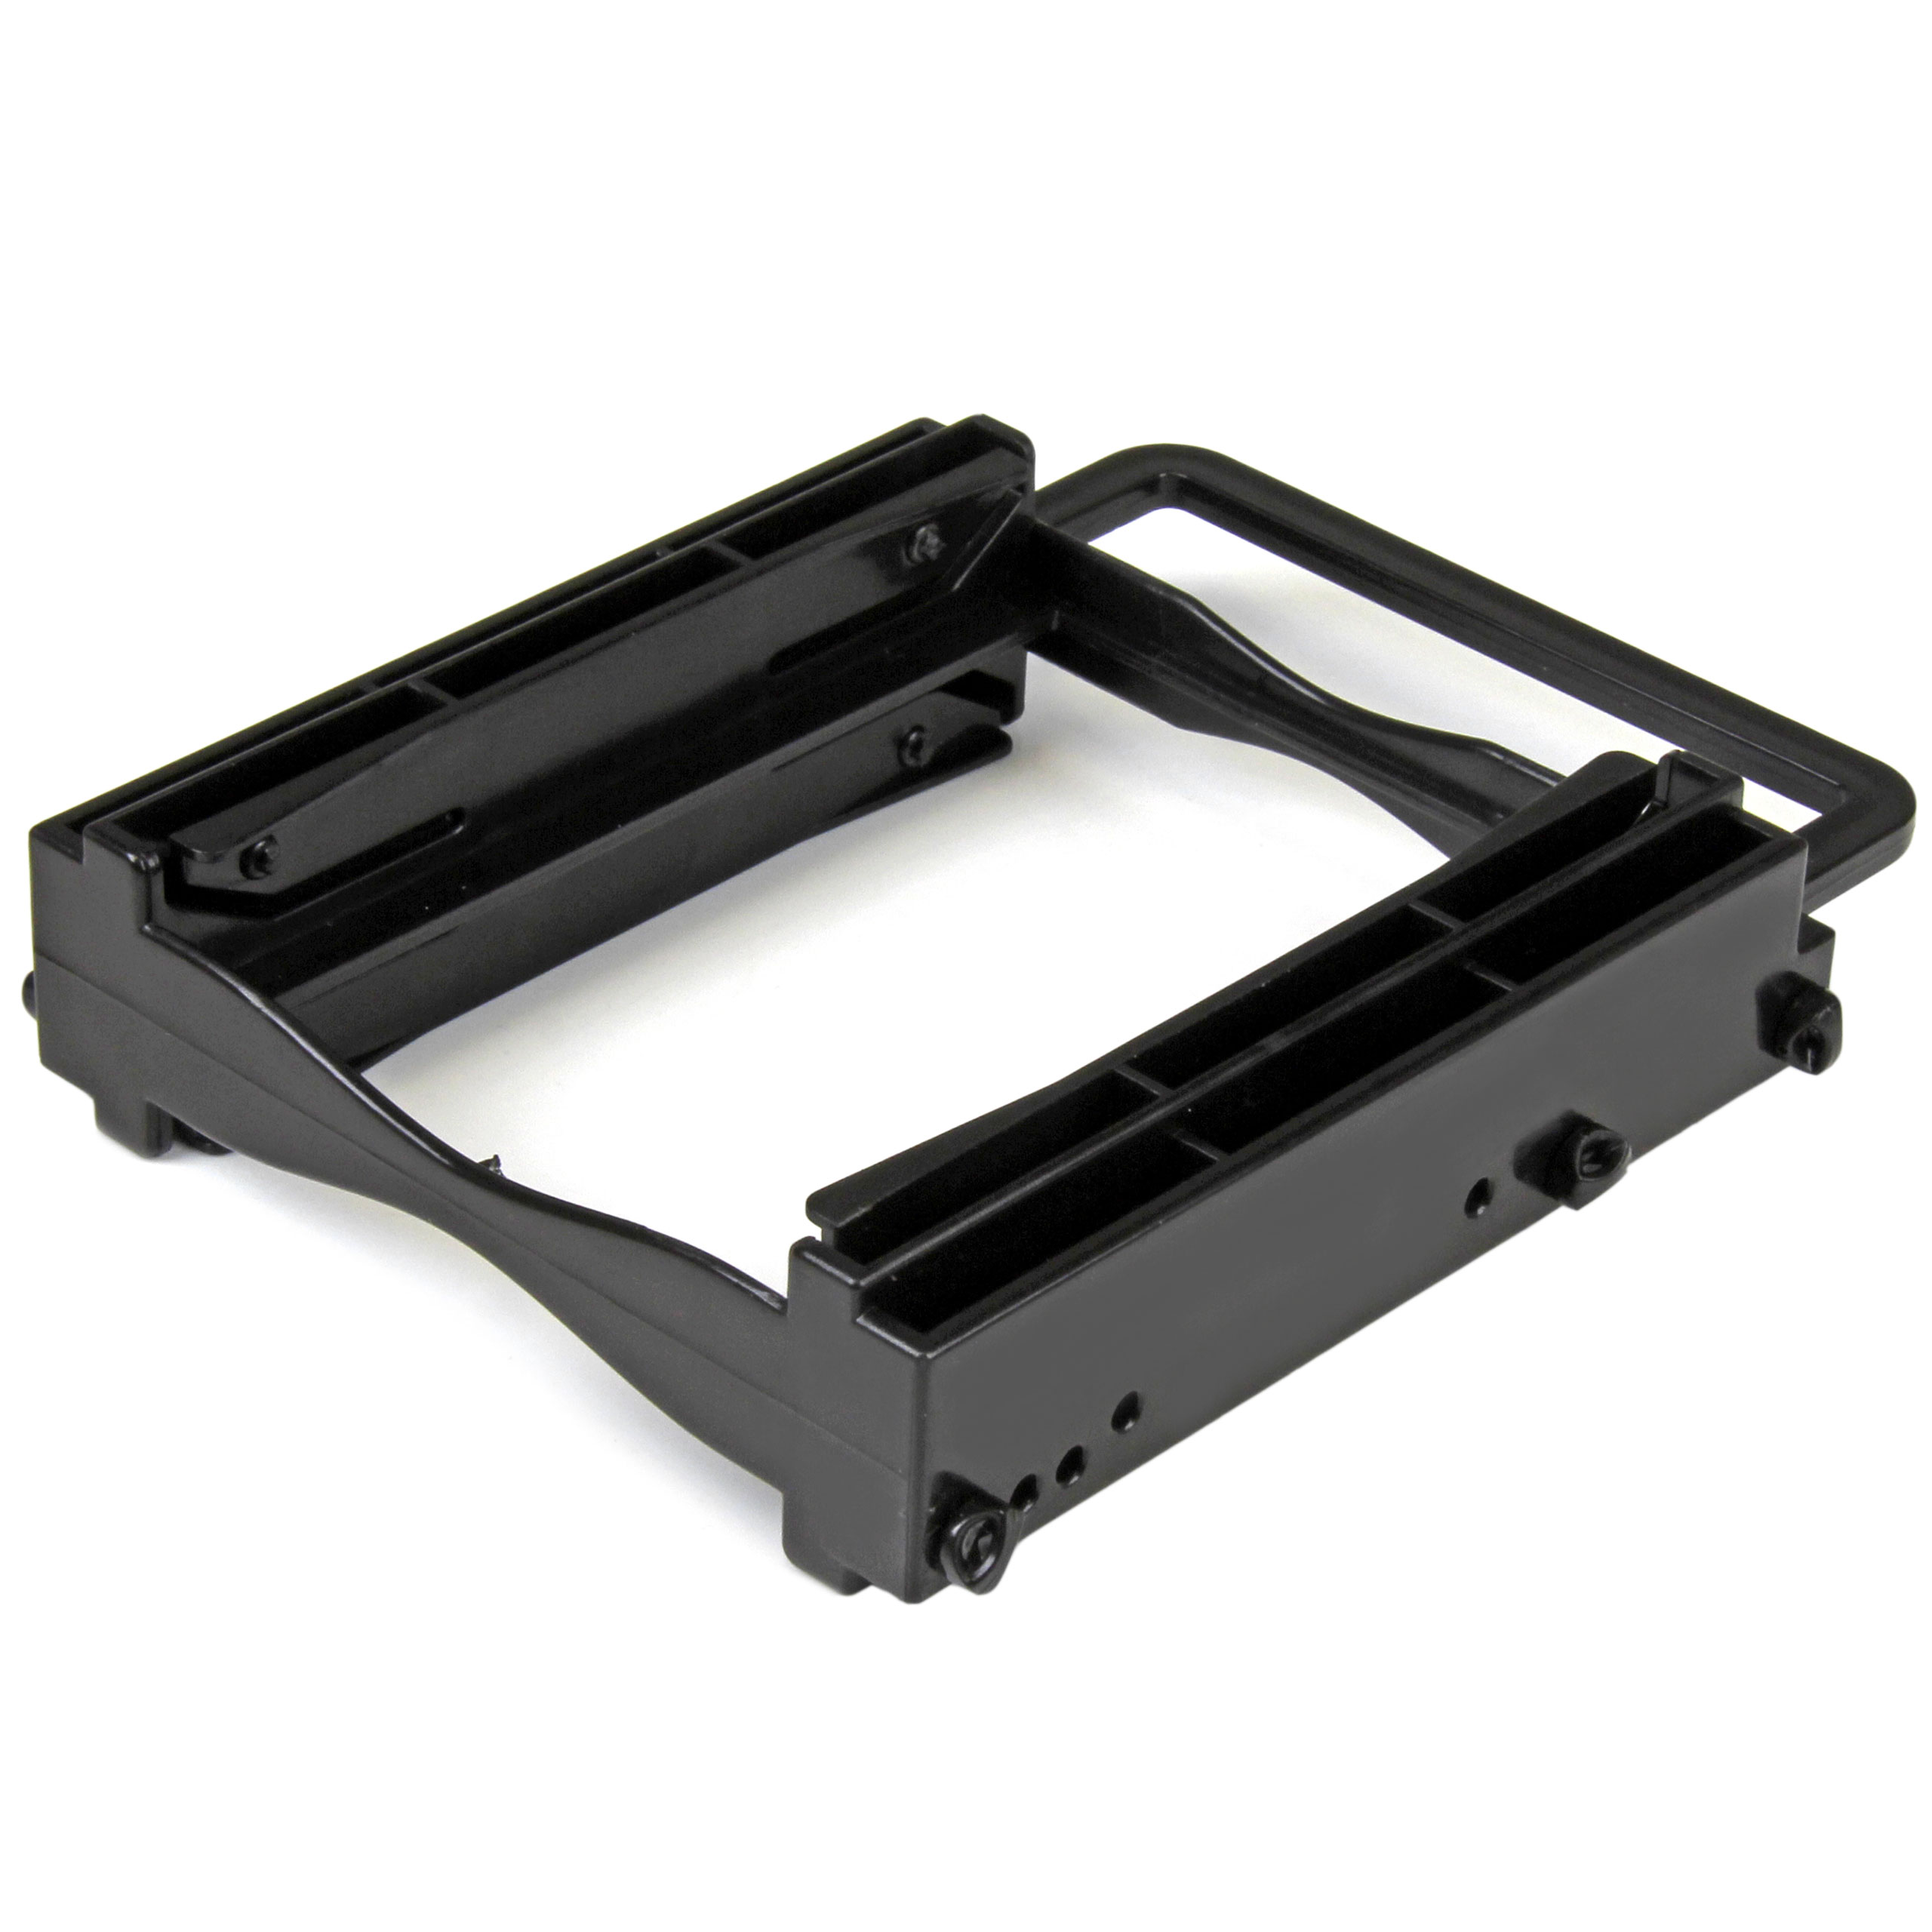 4 Bay 2.5 To 3.5 HDD Rack Converter SSD Adapter Mounting Bracket